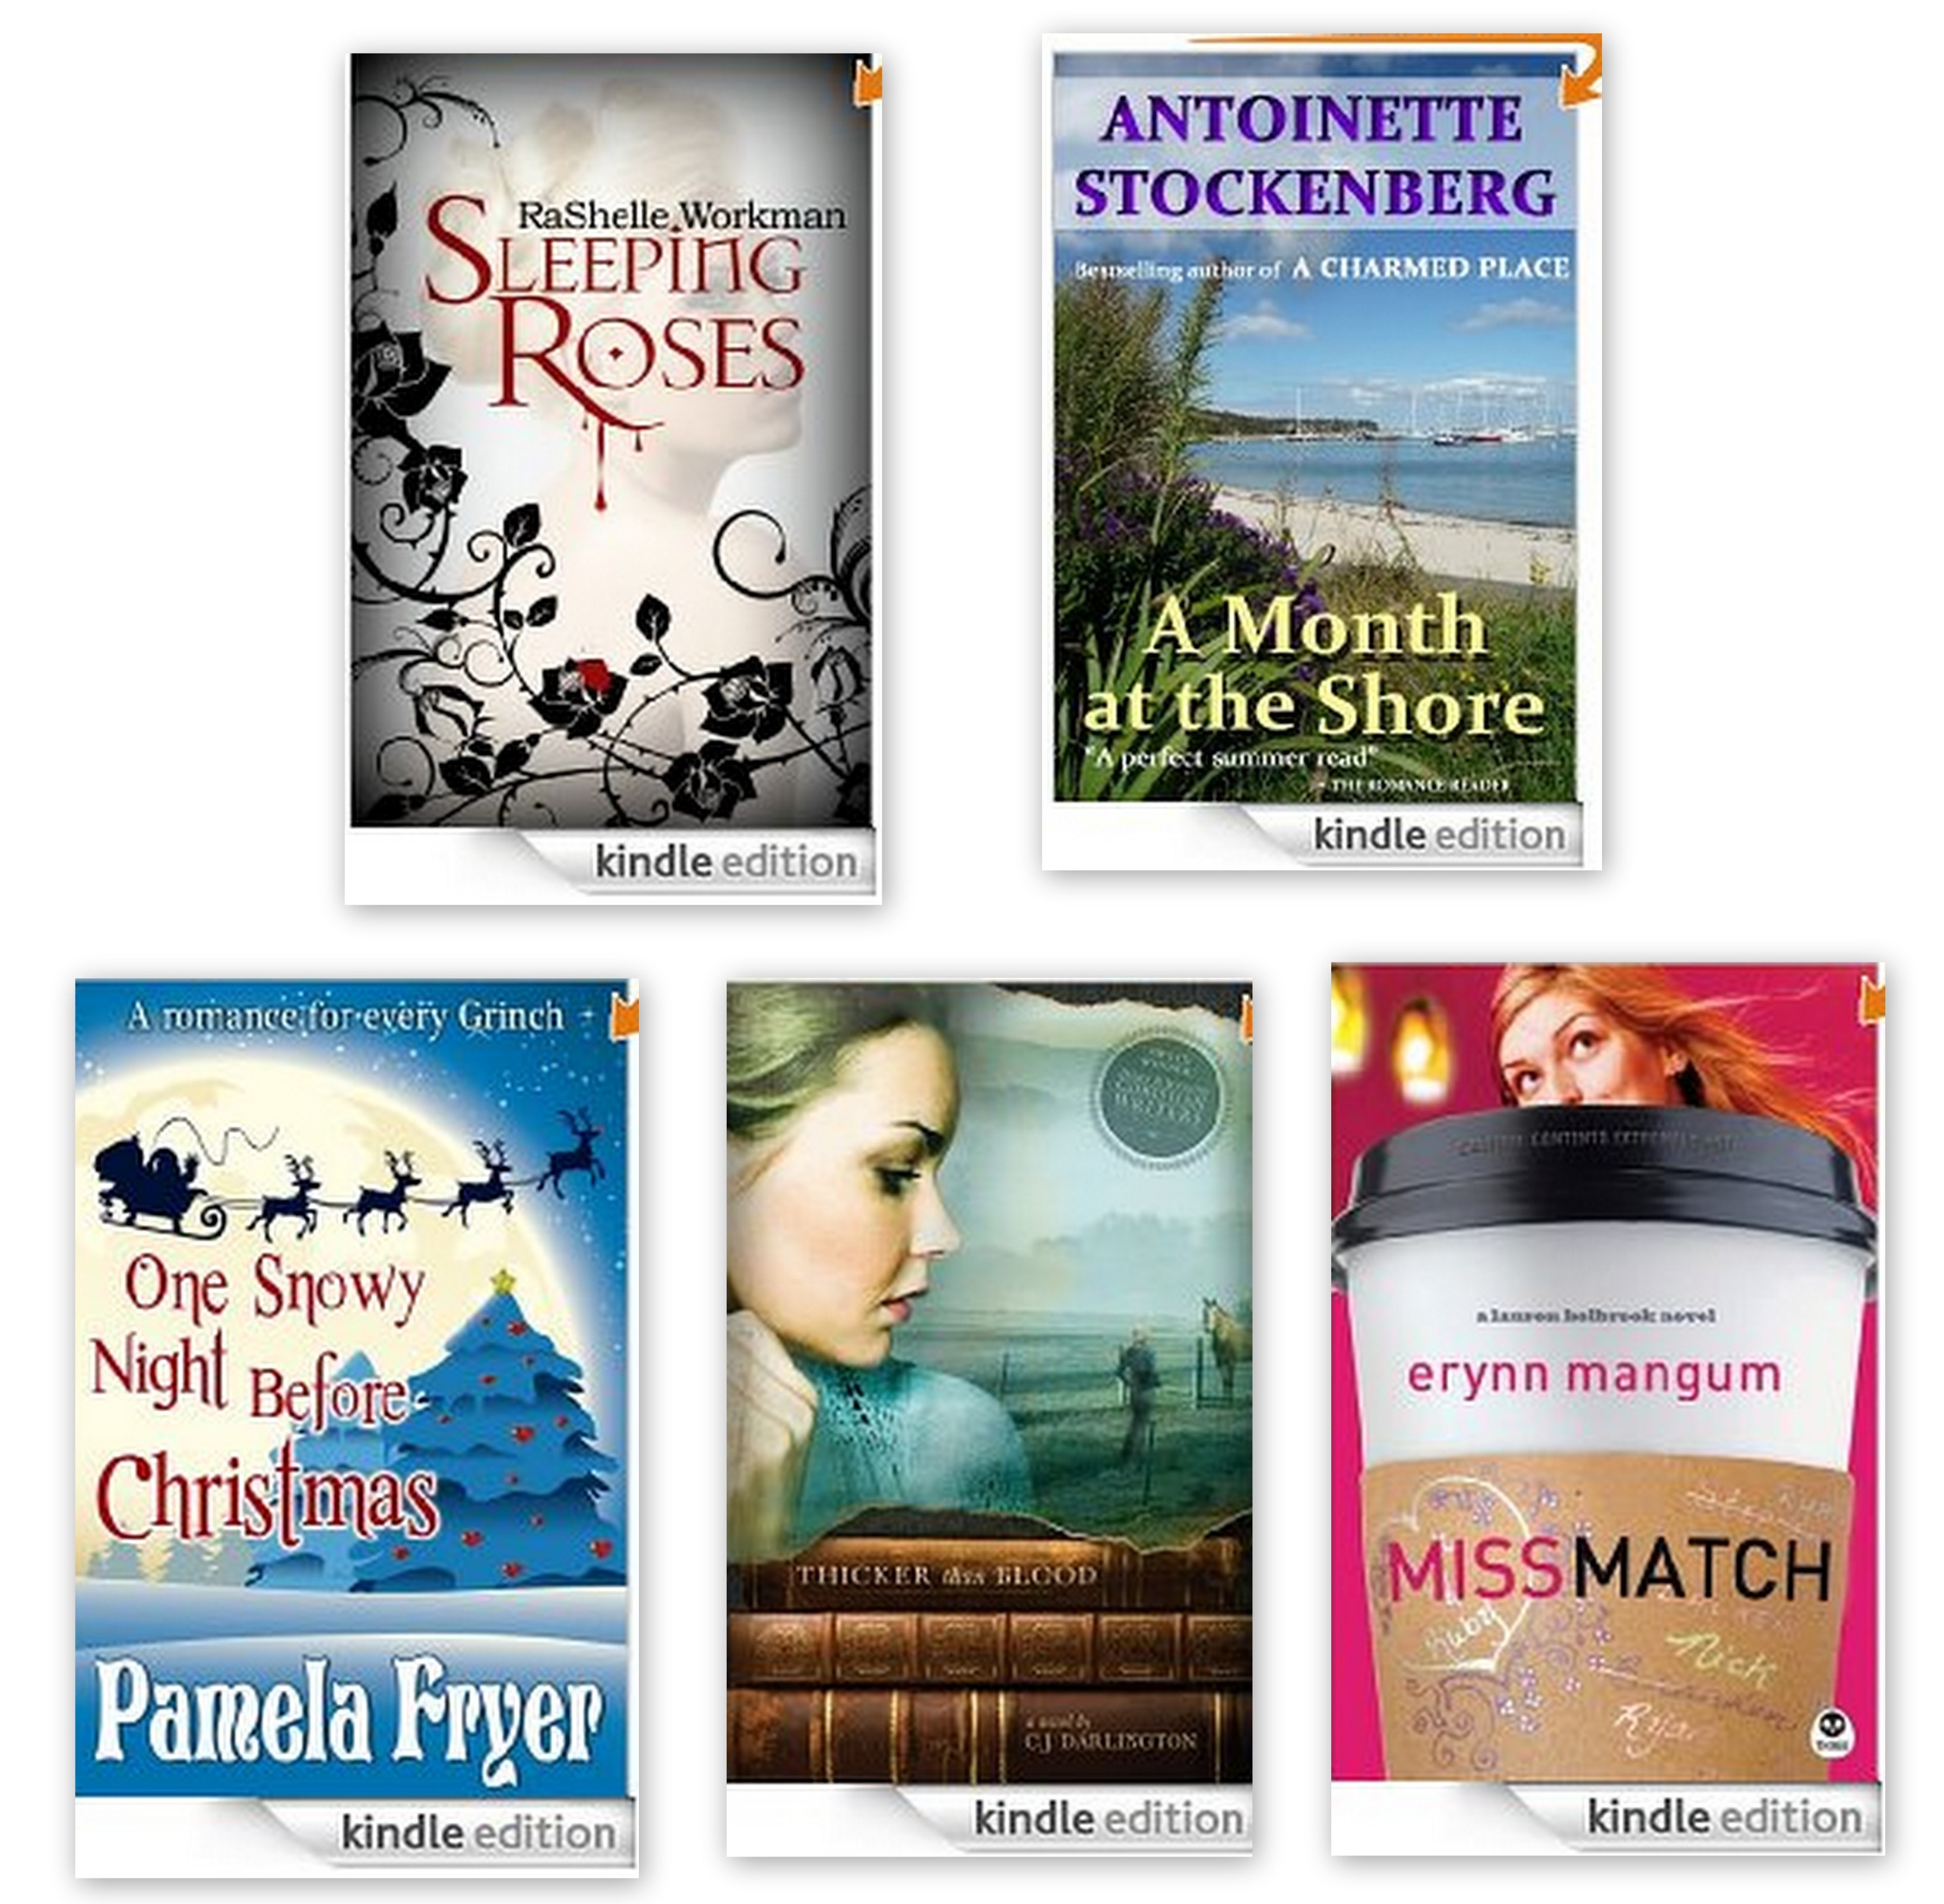 Free Kindle Books | Sleeping Roses, A Month at the Shore, One Snowy Night Before Christmas, Thicker than Blood and Miss Match